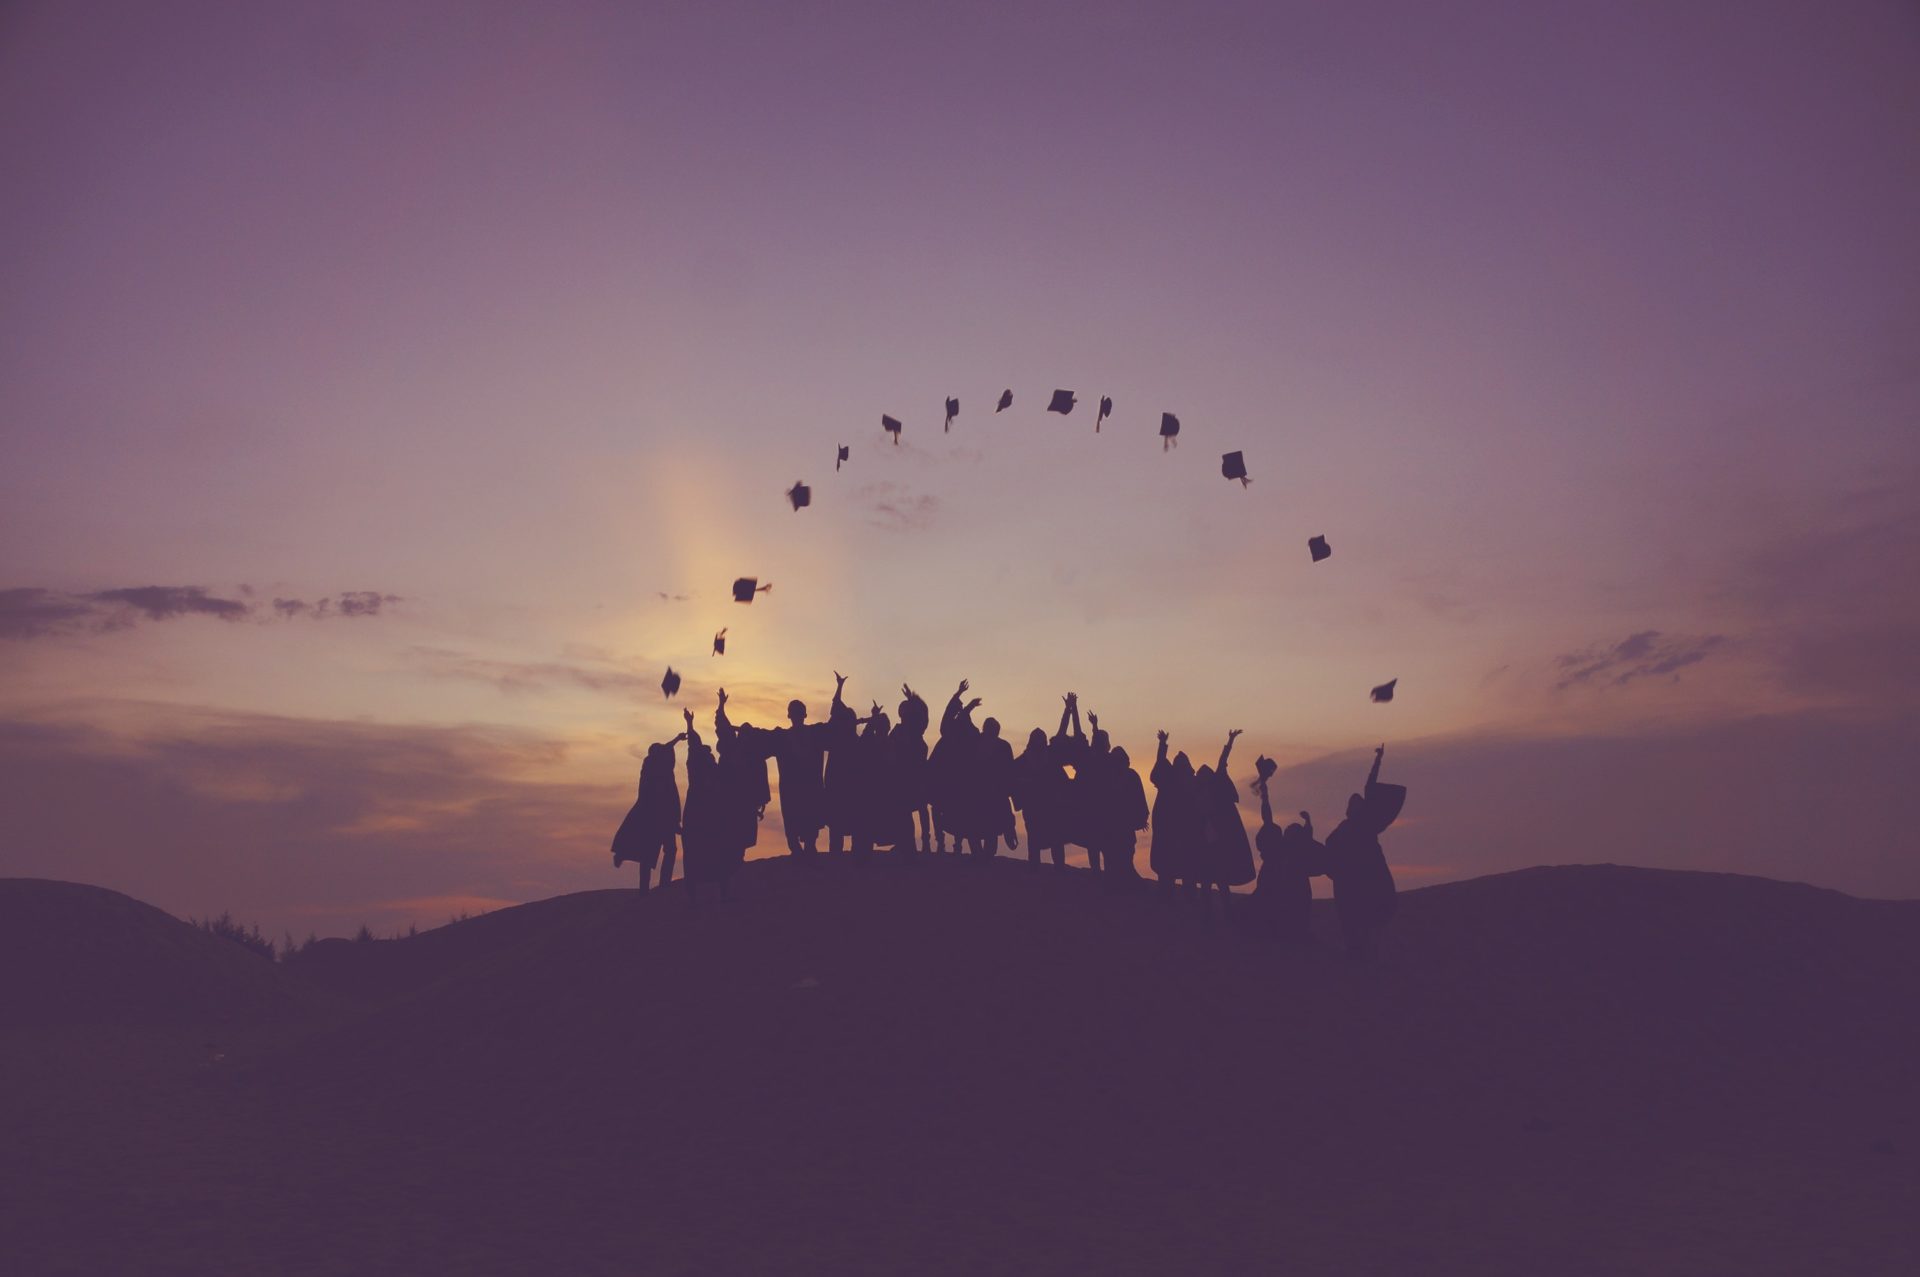 Group of recent graduates standing in a line together celebrating graduation by throwing their hats into the air. Hats make the shape of a half circle.